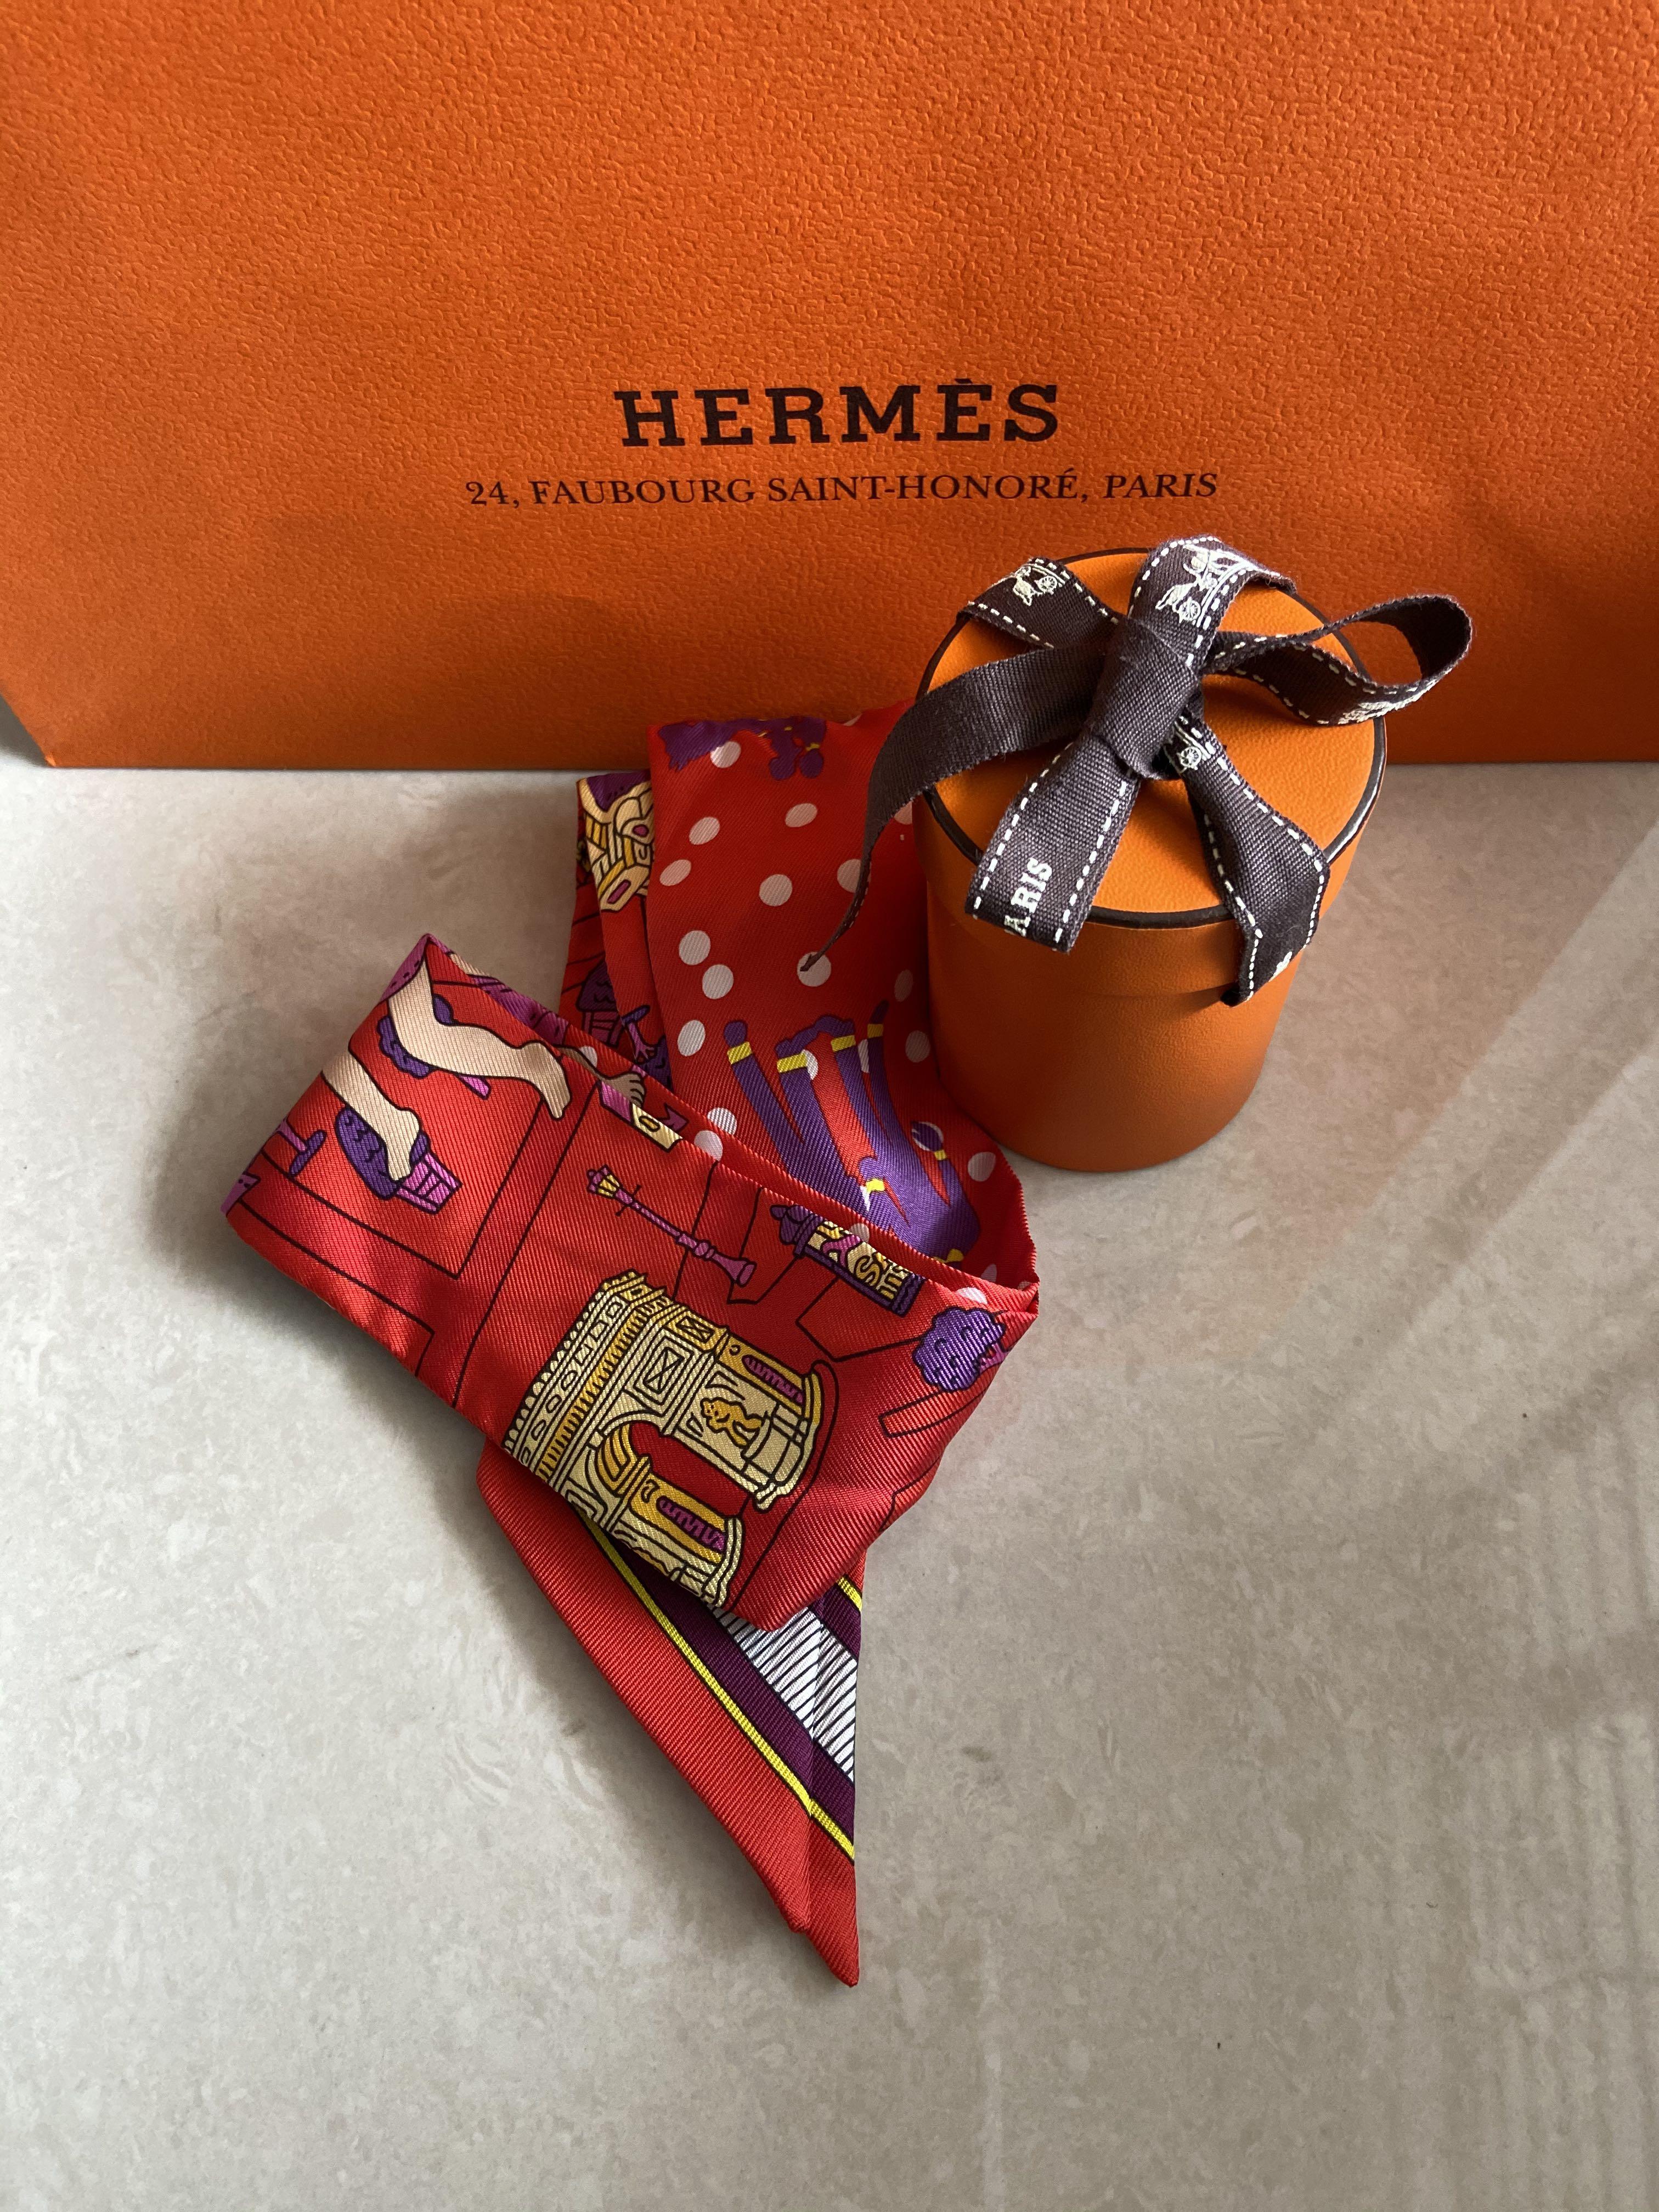 Hermes Accessories ⭐️ Xmas gift ideas 🎄 🎁 🎉price from $100 